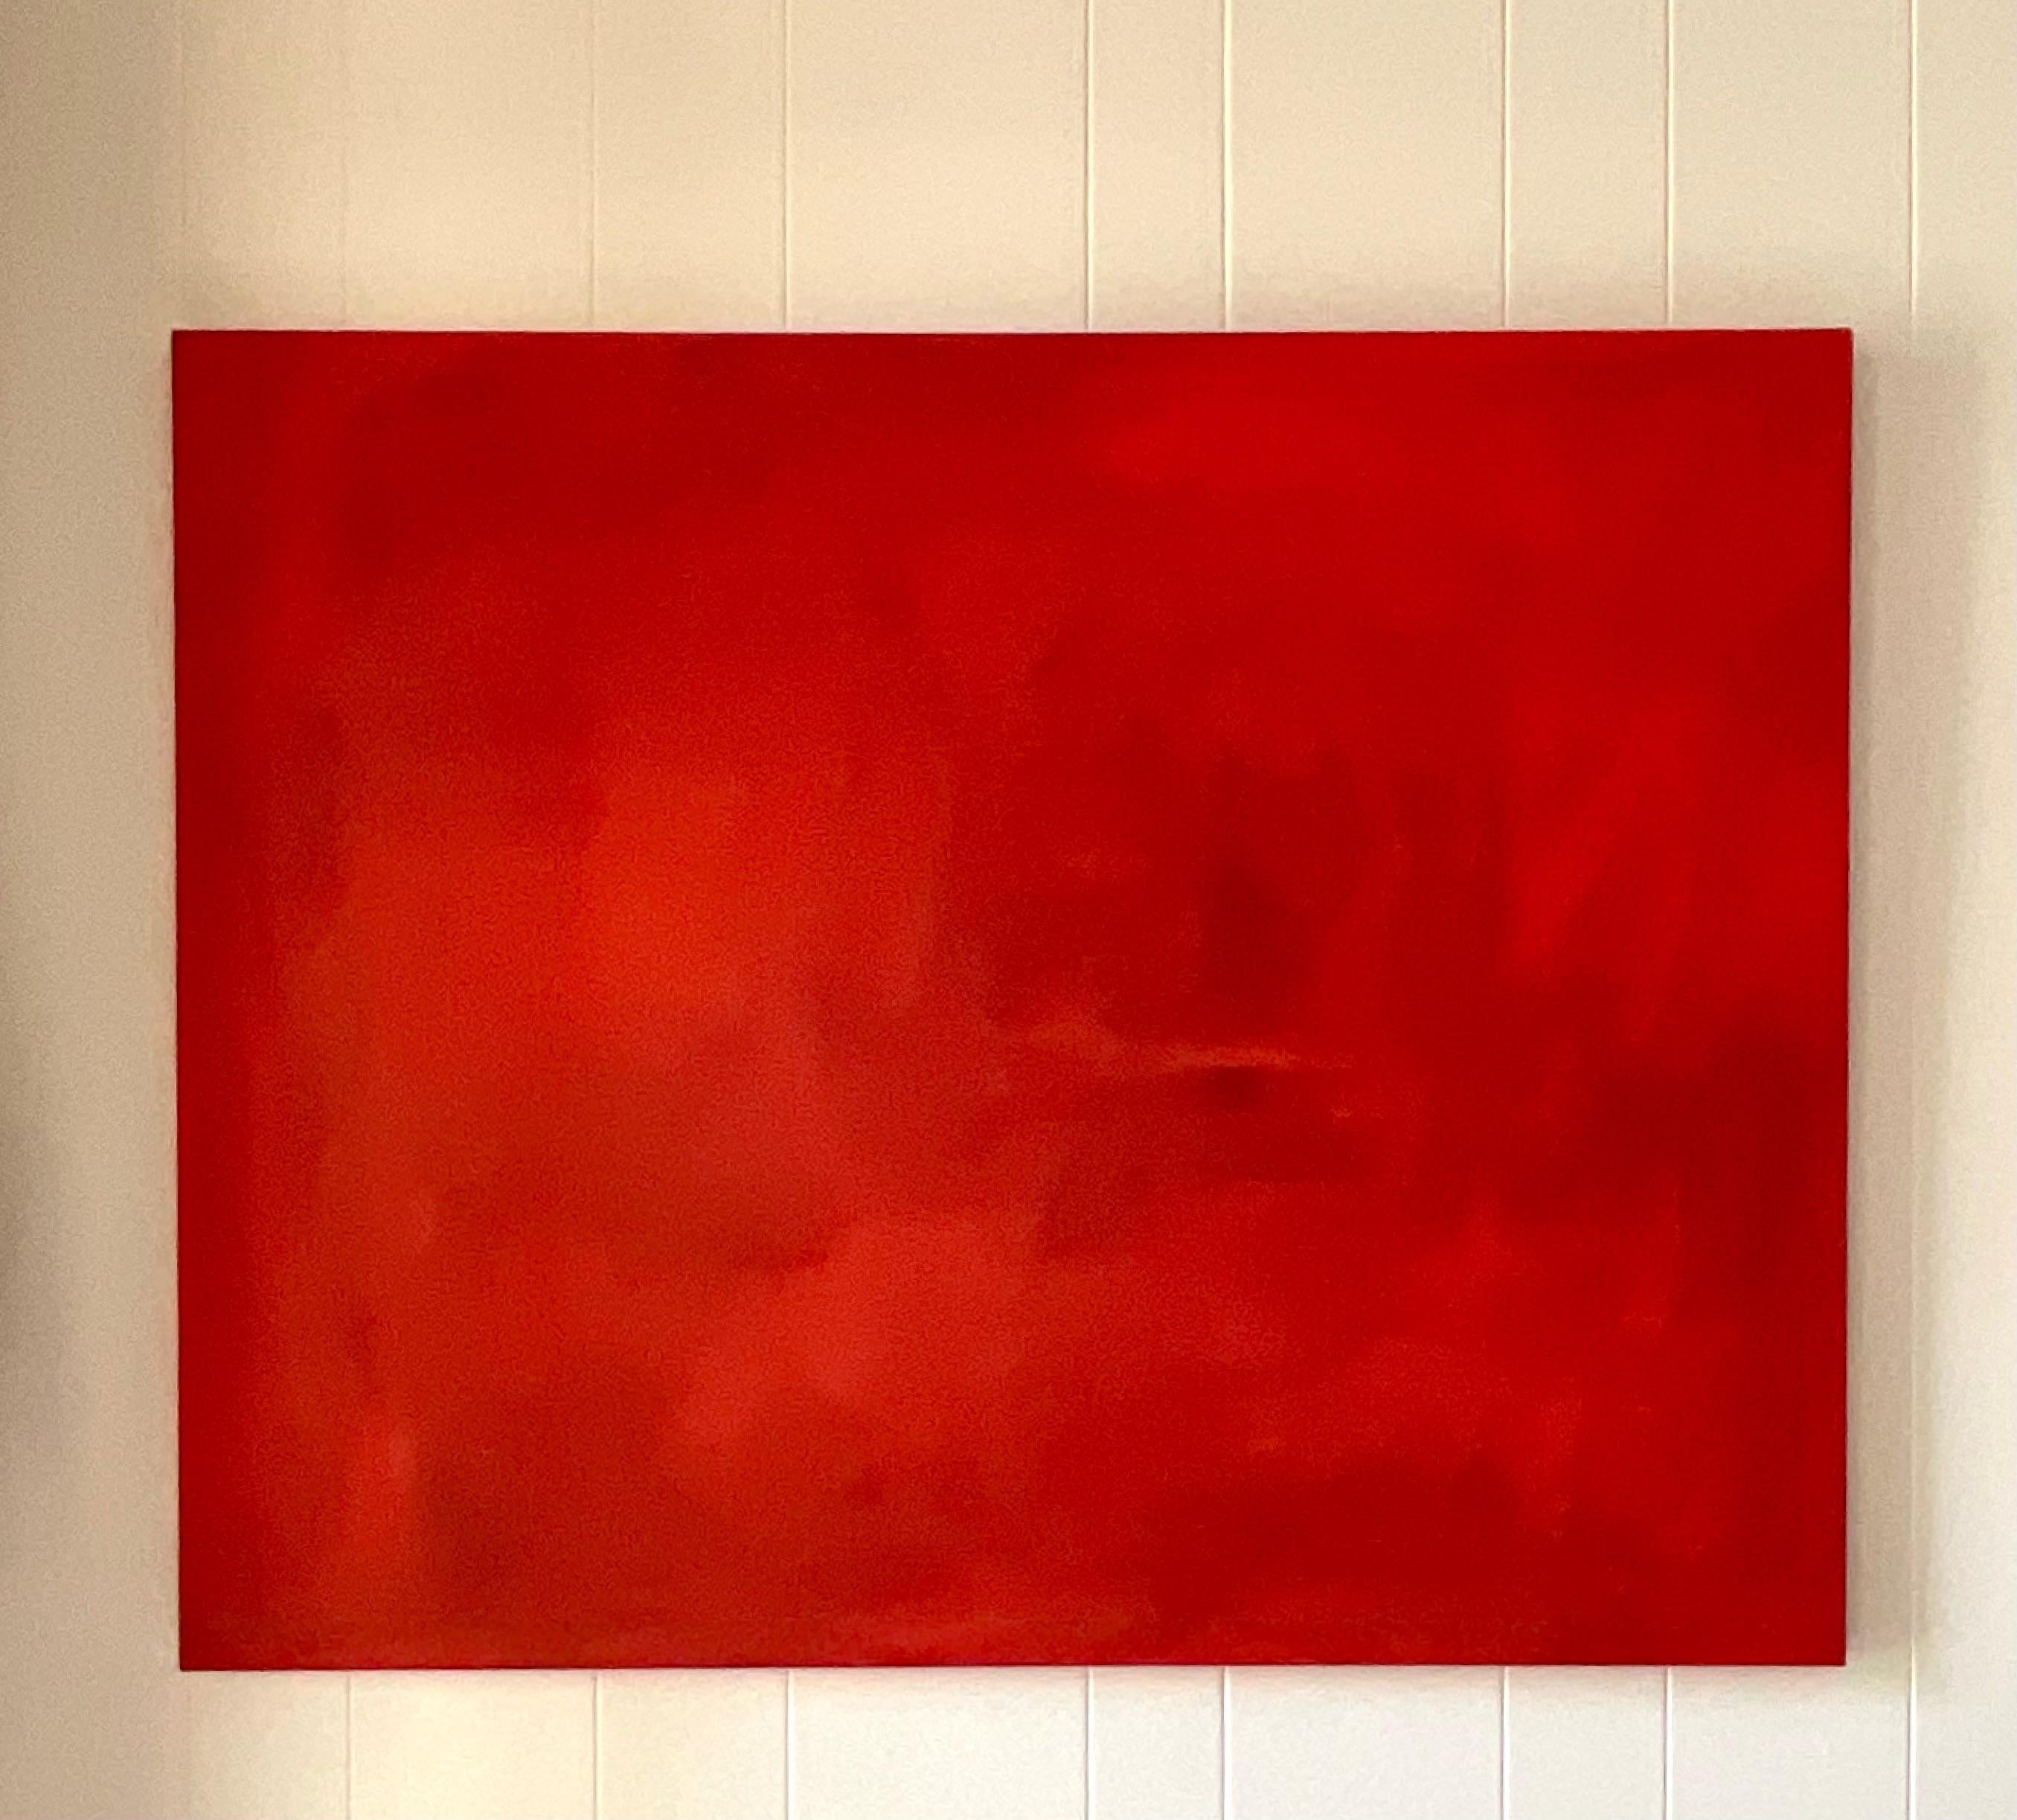 Captivating vintage red oil painting on canvas. This canvas evokes emotion and strength within anyone whom is lucky enough to gaze upon it in real life. The vibrancy and the depth of the layers of red make it almost impossible to describe in words,